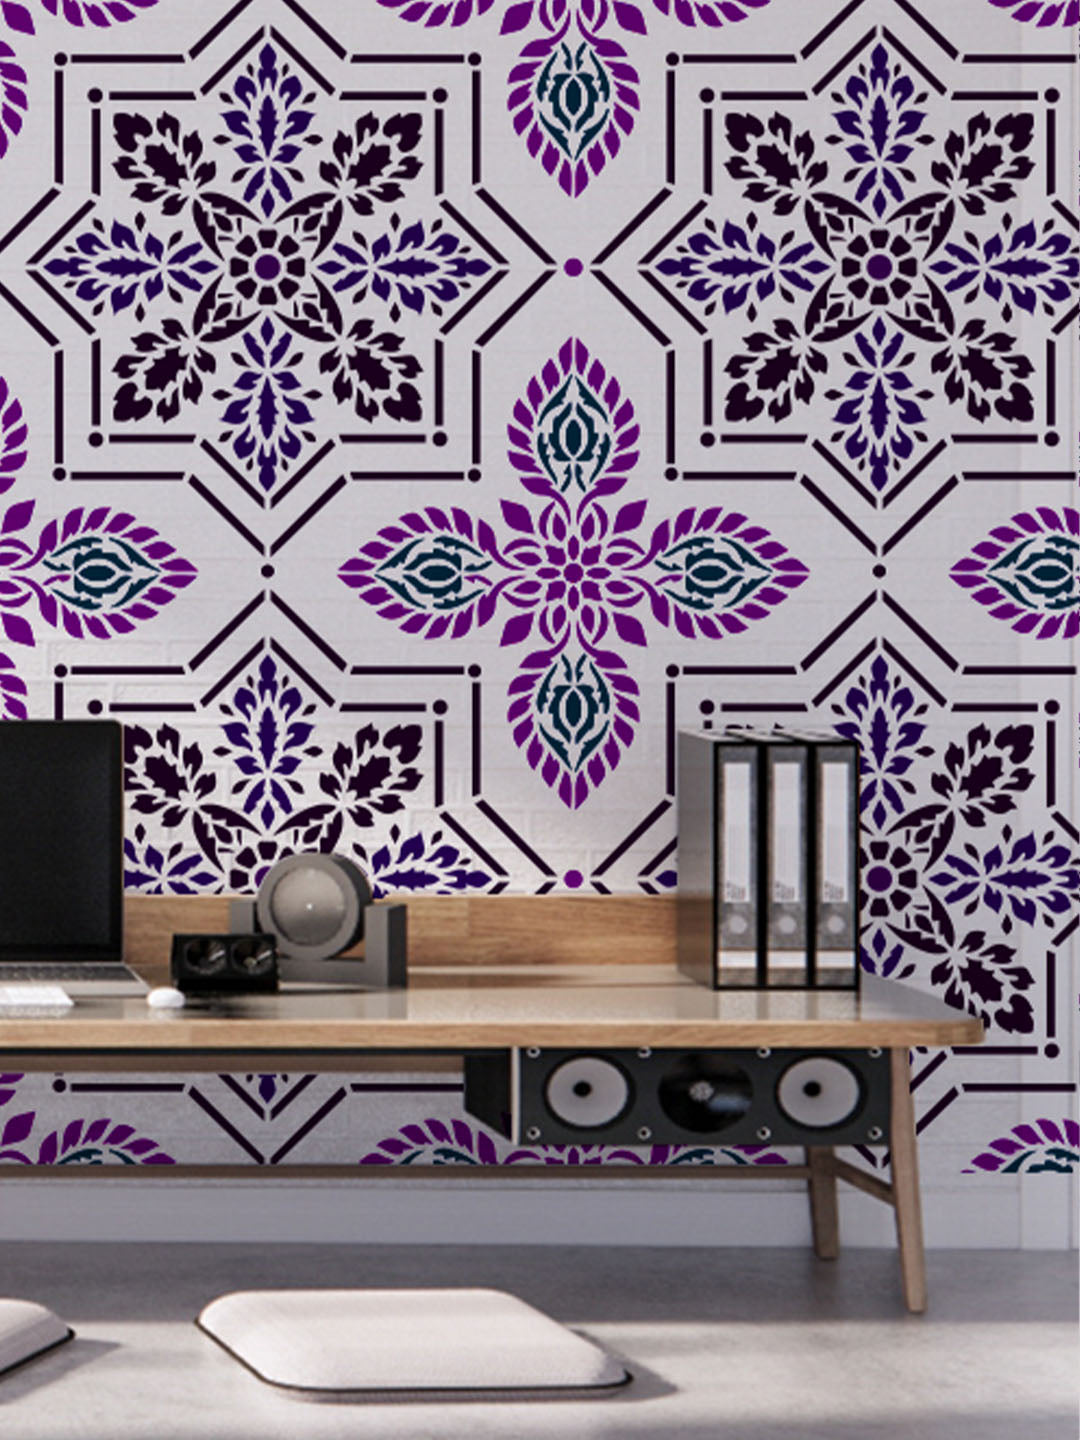 Damask Design Stencils for Wall Painting (KDMD1400)